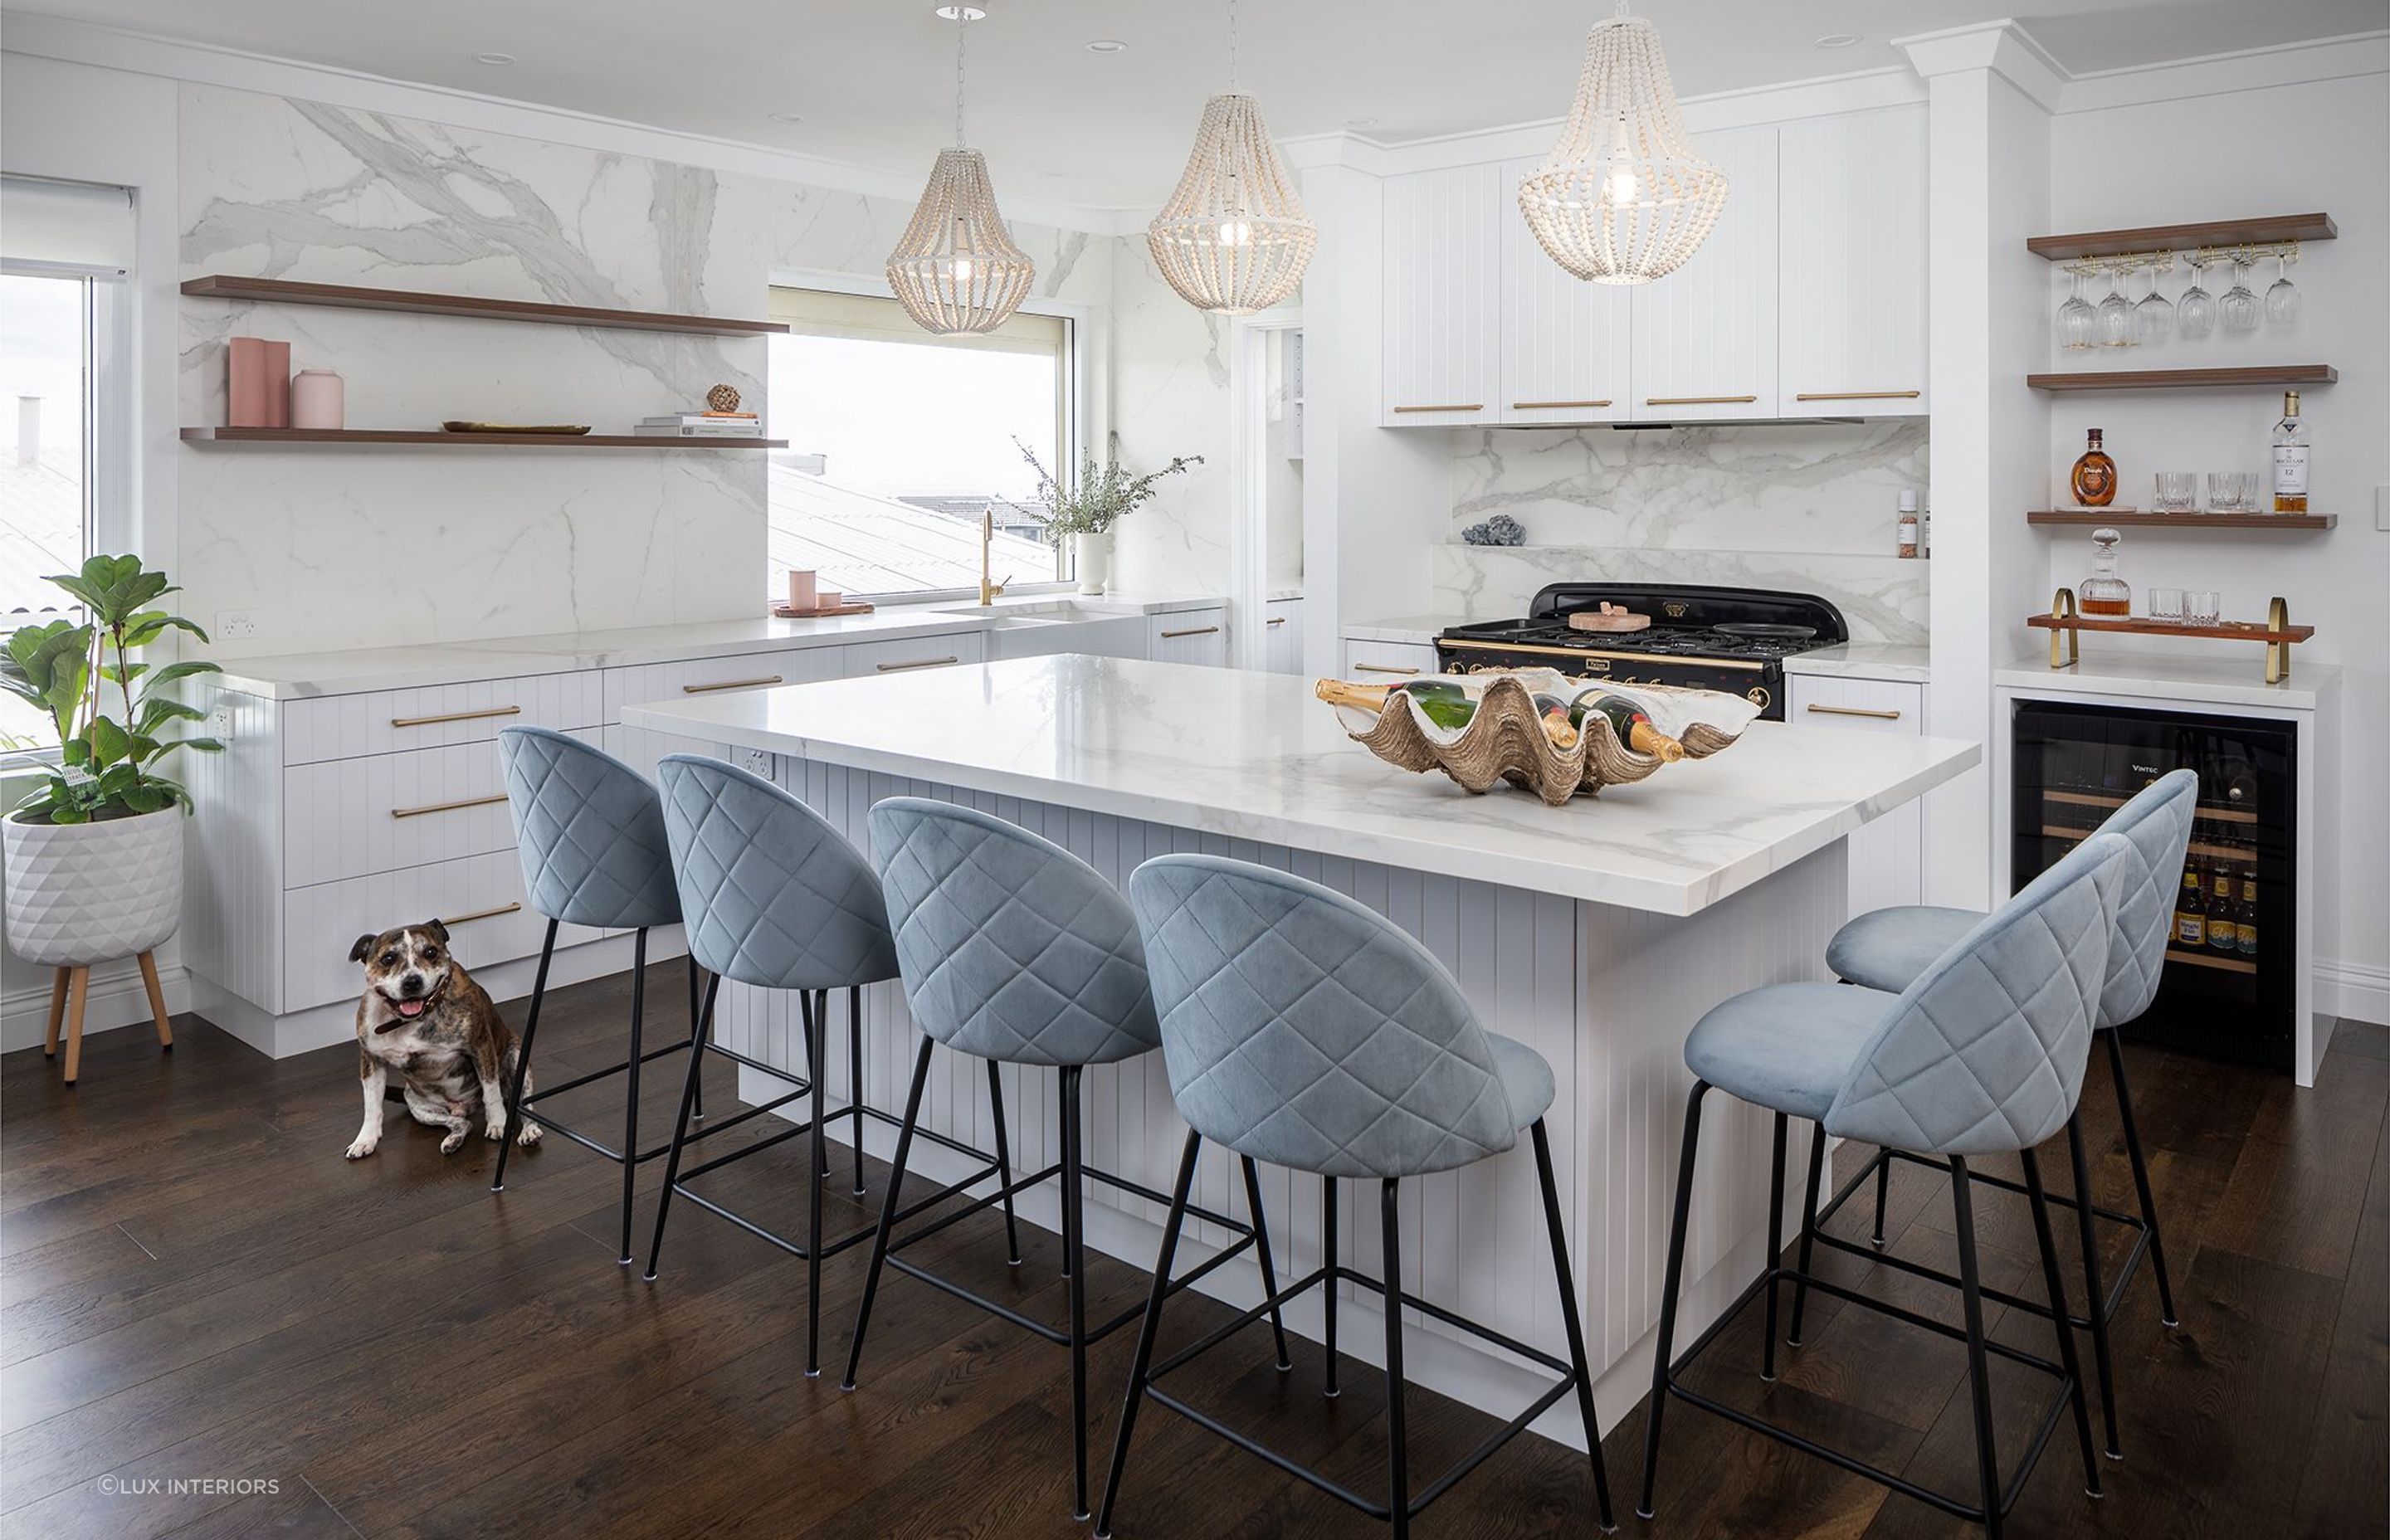 Large counter spaces, high-end appliances, ample storage - the Sholl Project has all the ingredients of a chef's kitchen - Photography: Silvertone Photography